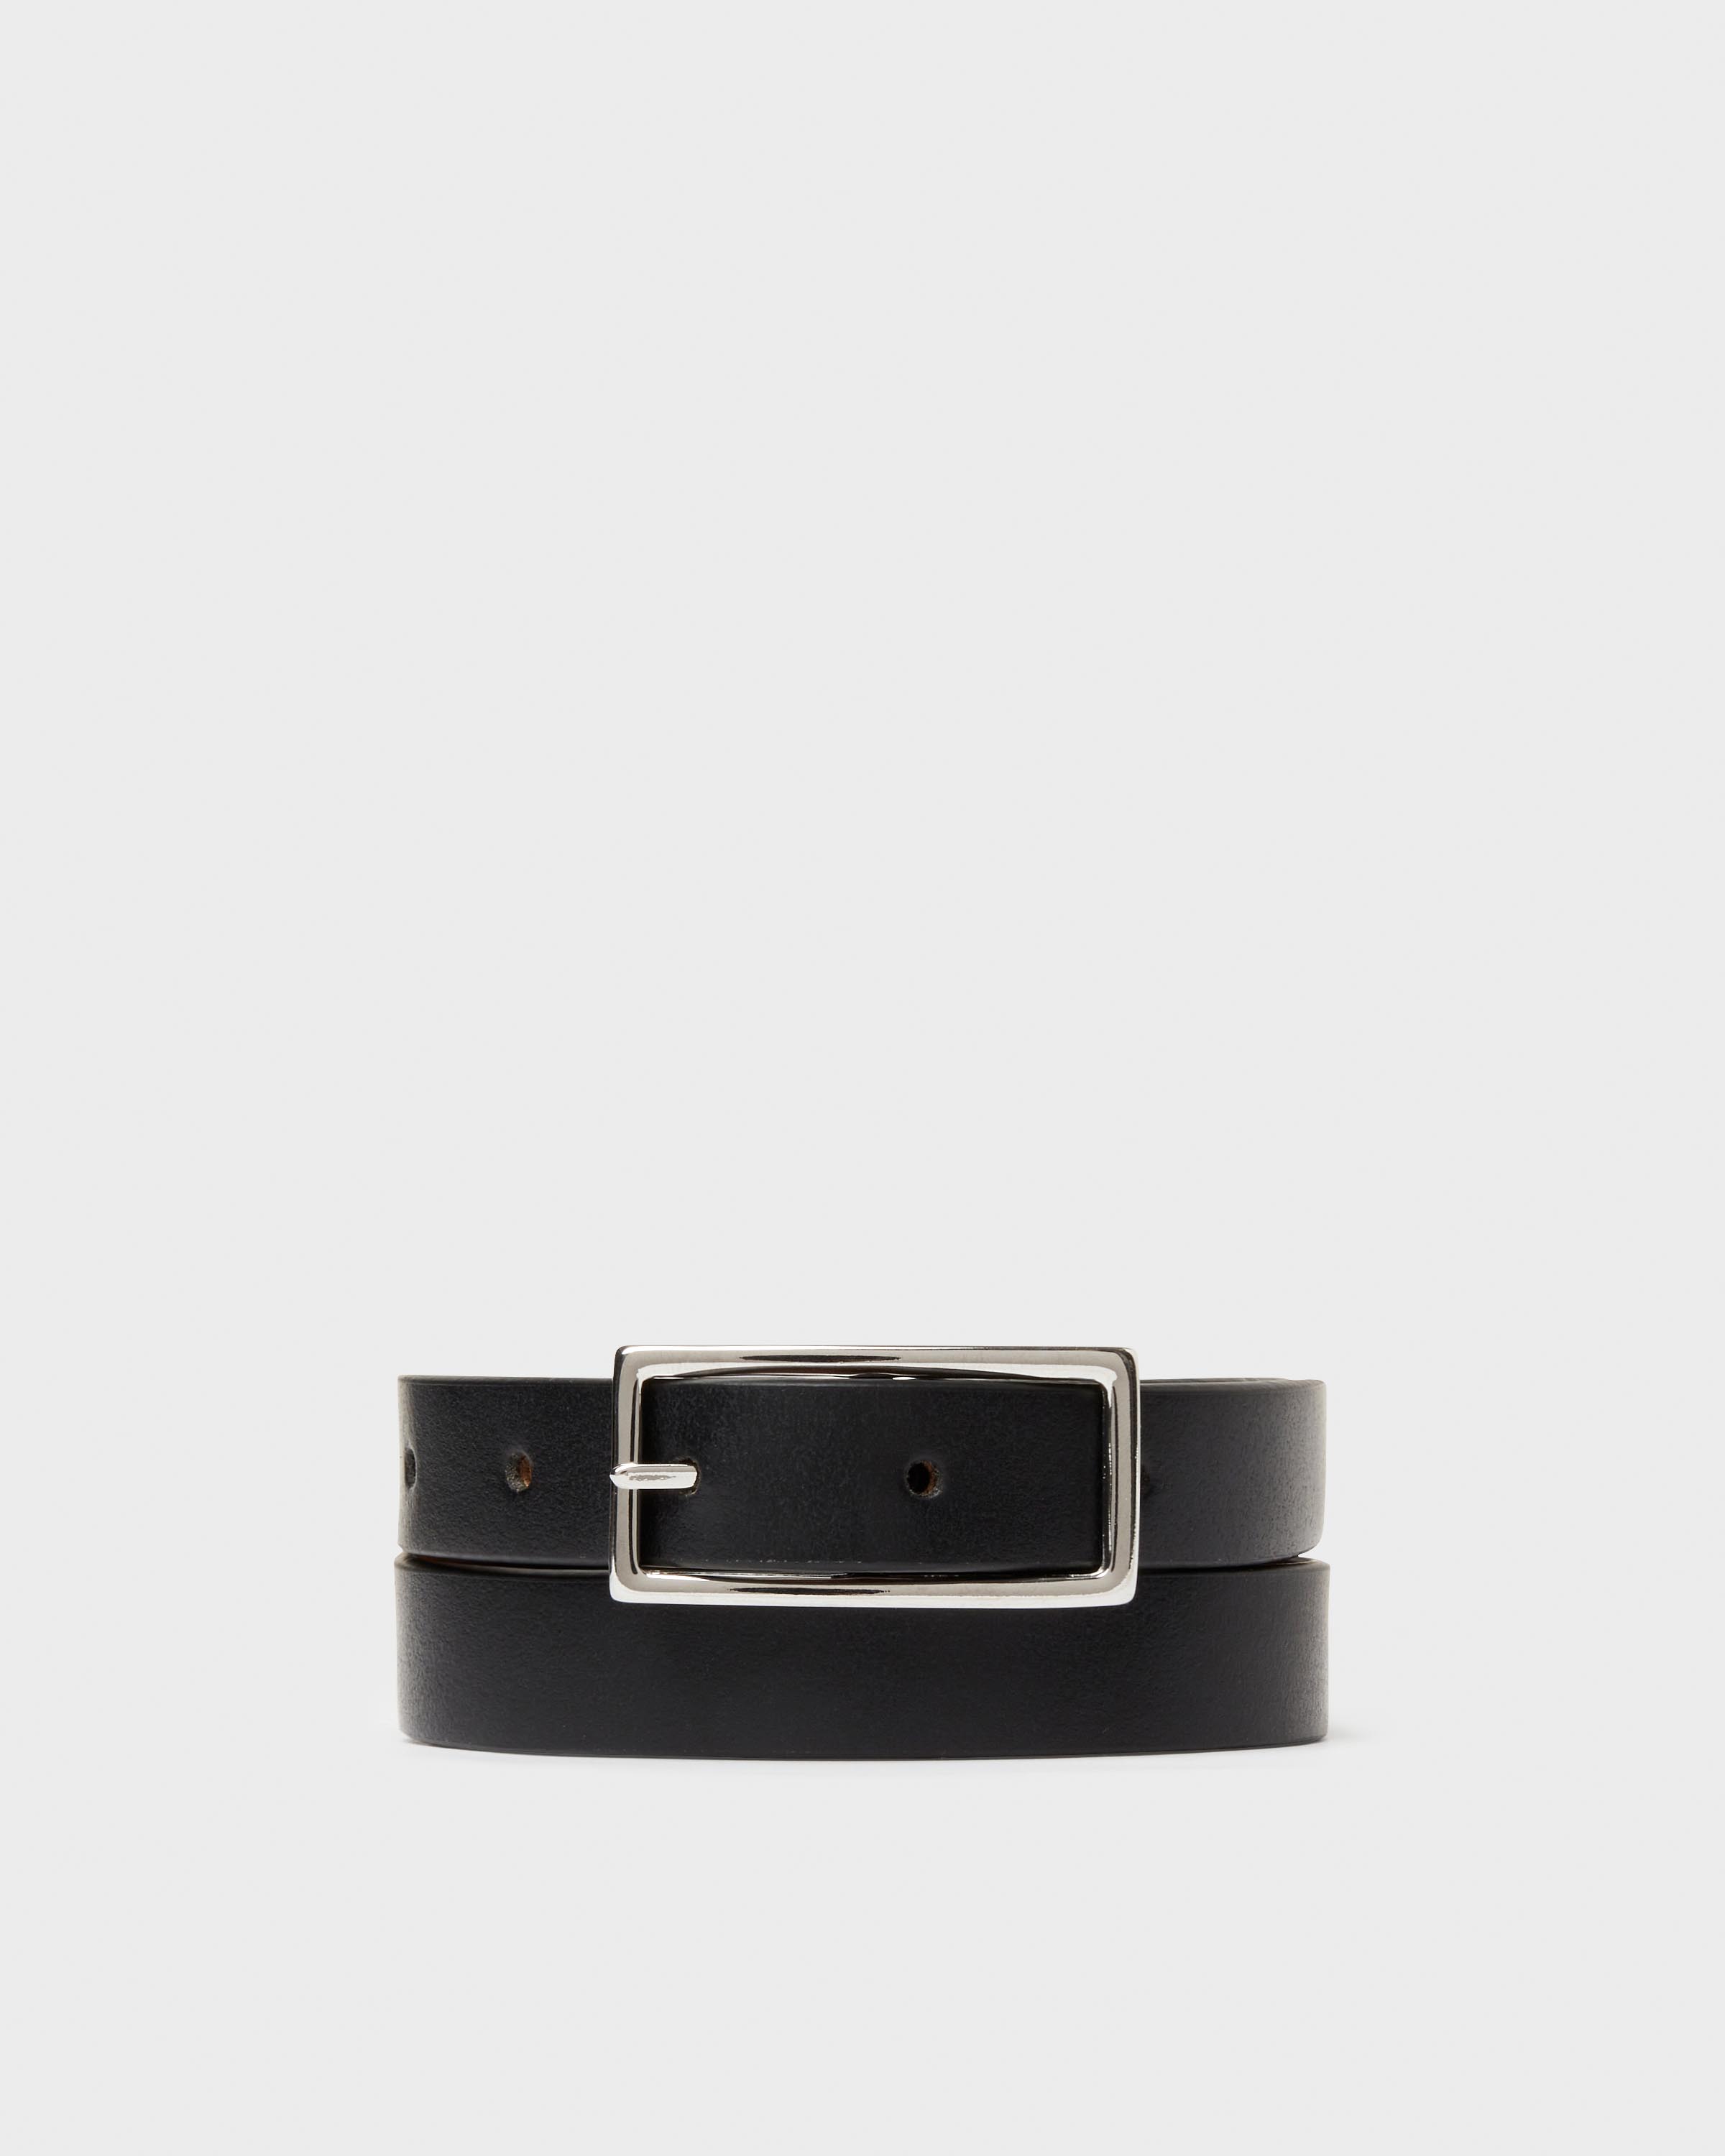 Braided leather belt for women at  - The Swedish leather brand